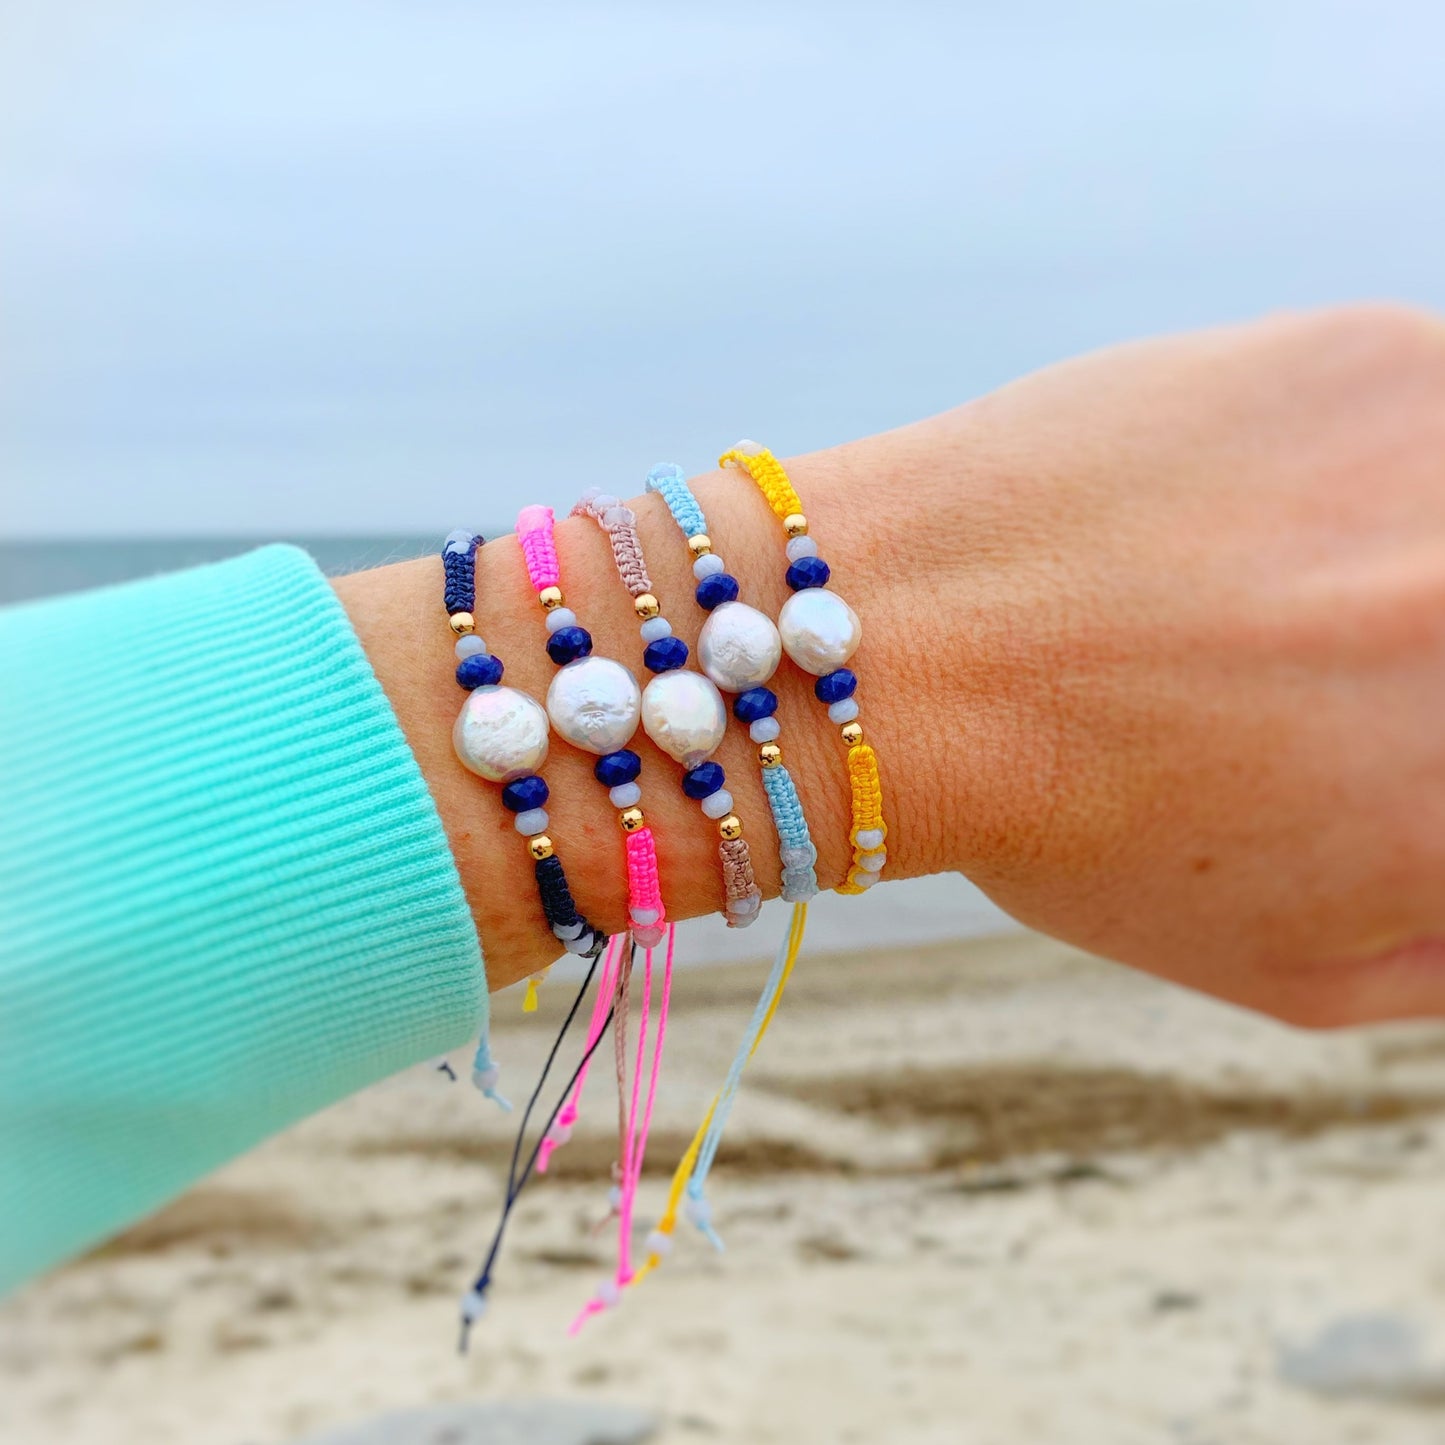 Mermaids and madeleines bristol macrame bracelets all four color stacked up and worn on a wrist in front of the beach in the background